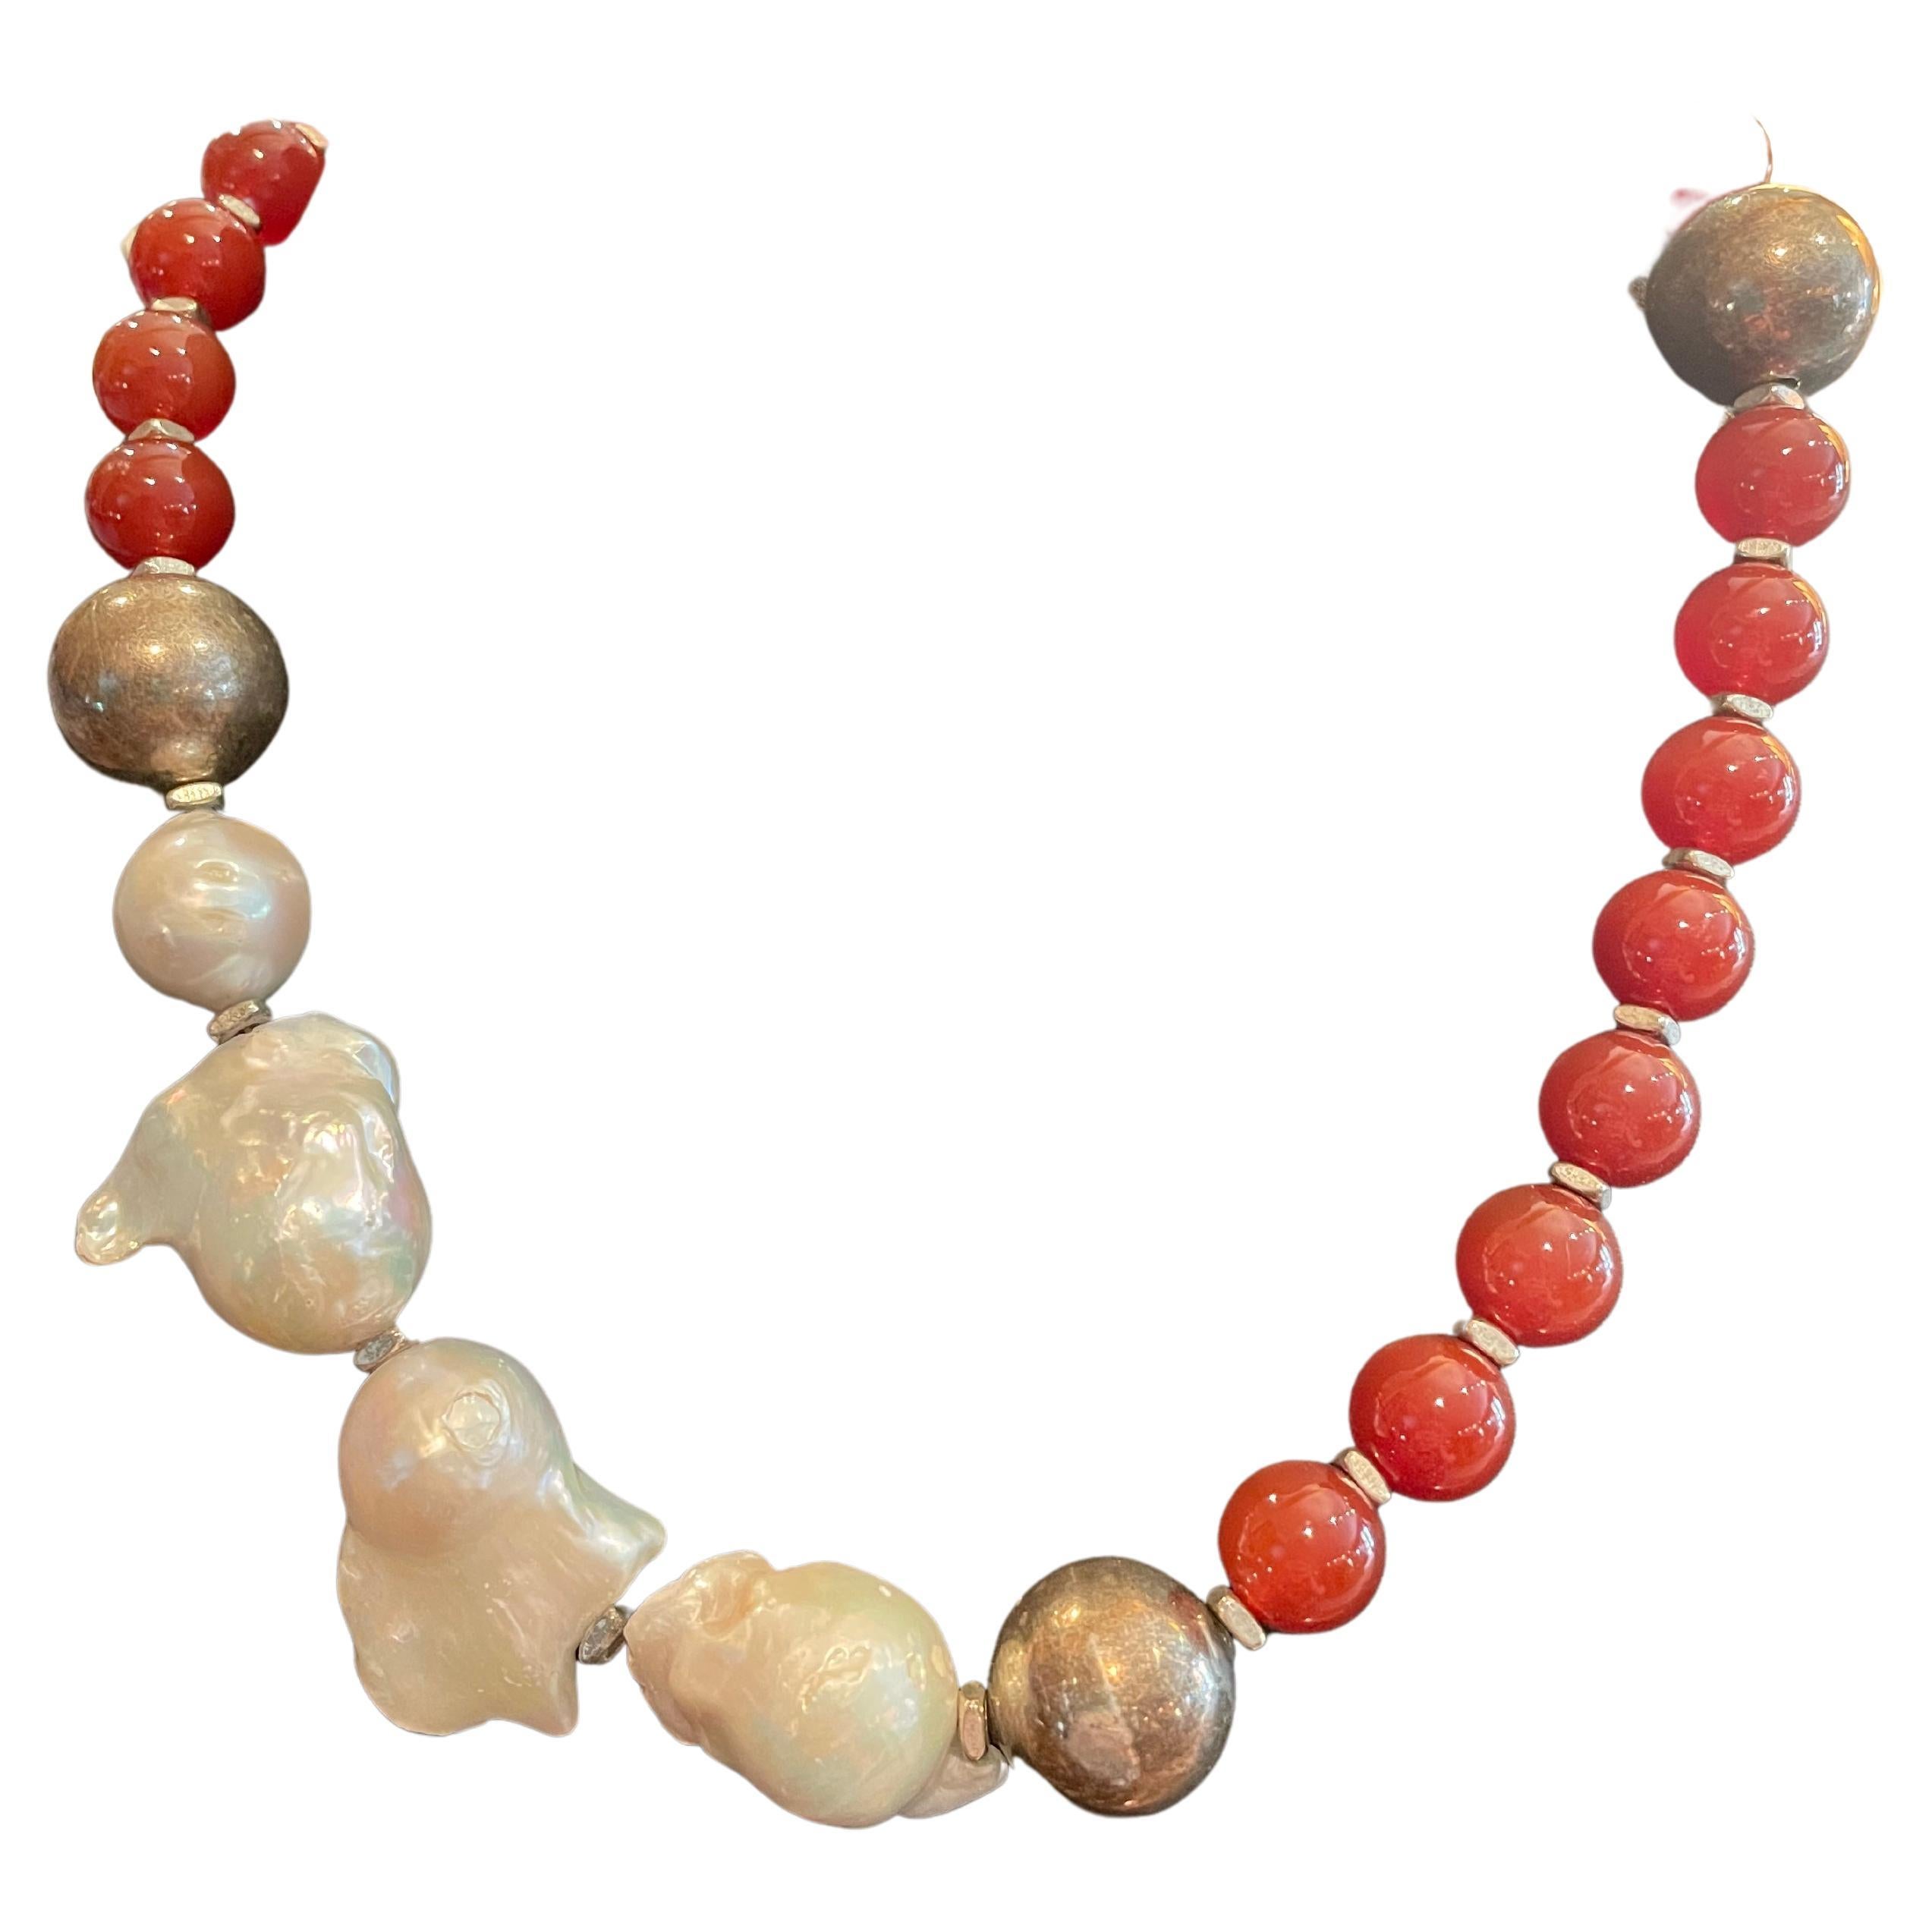 LB orange Carnelian Large Chinese Baroque Pearls Sterling Silver Necklace